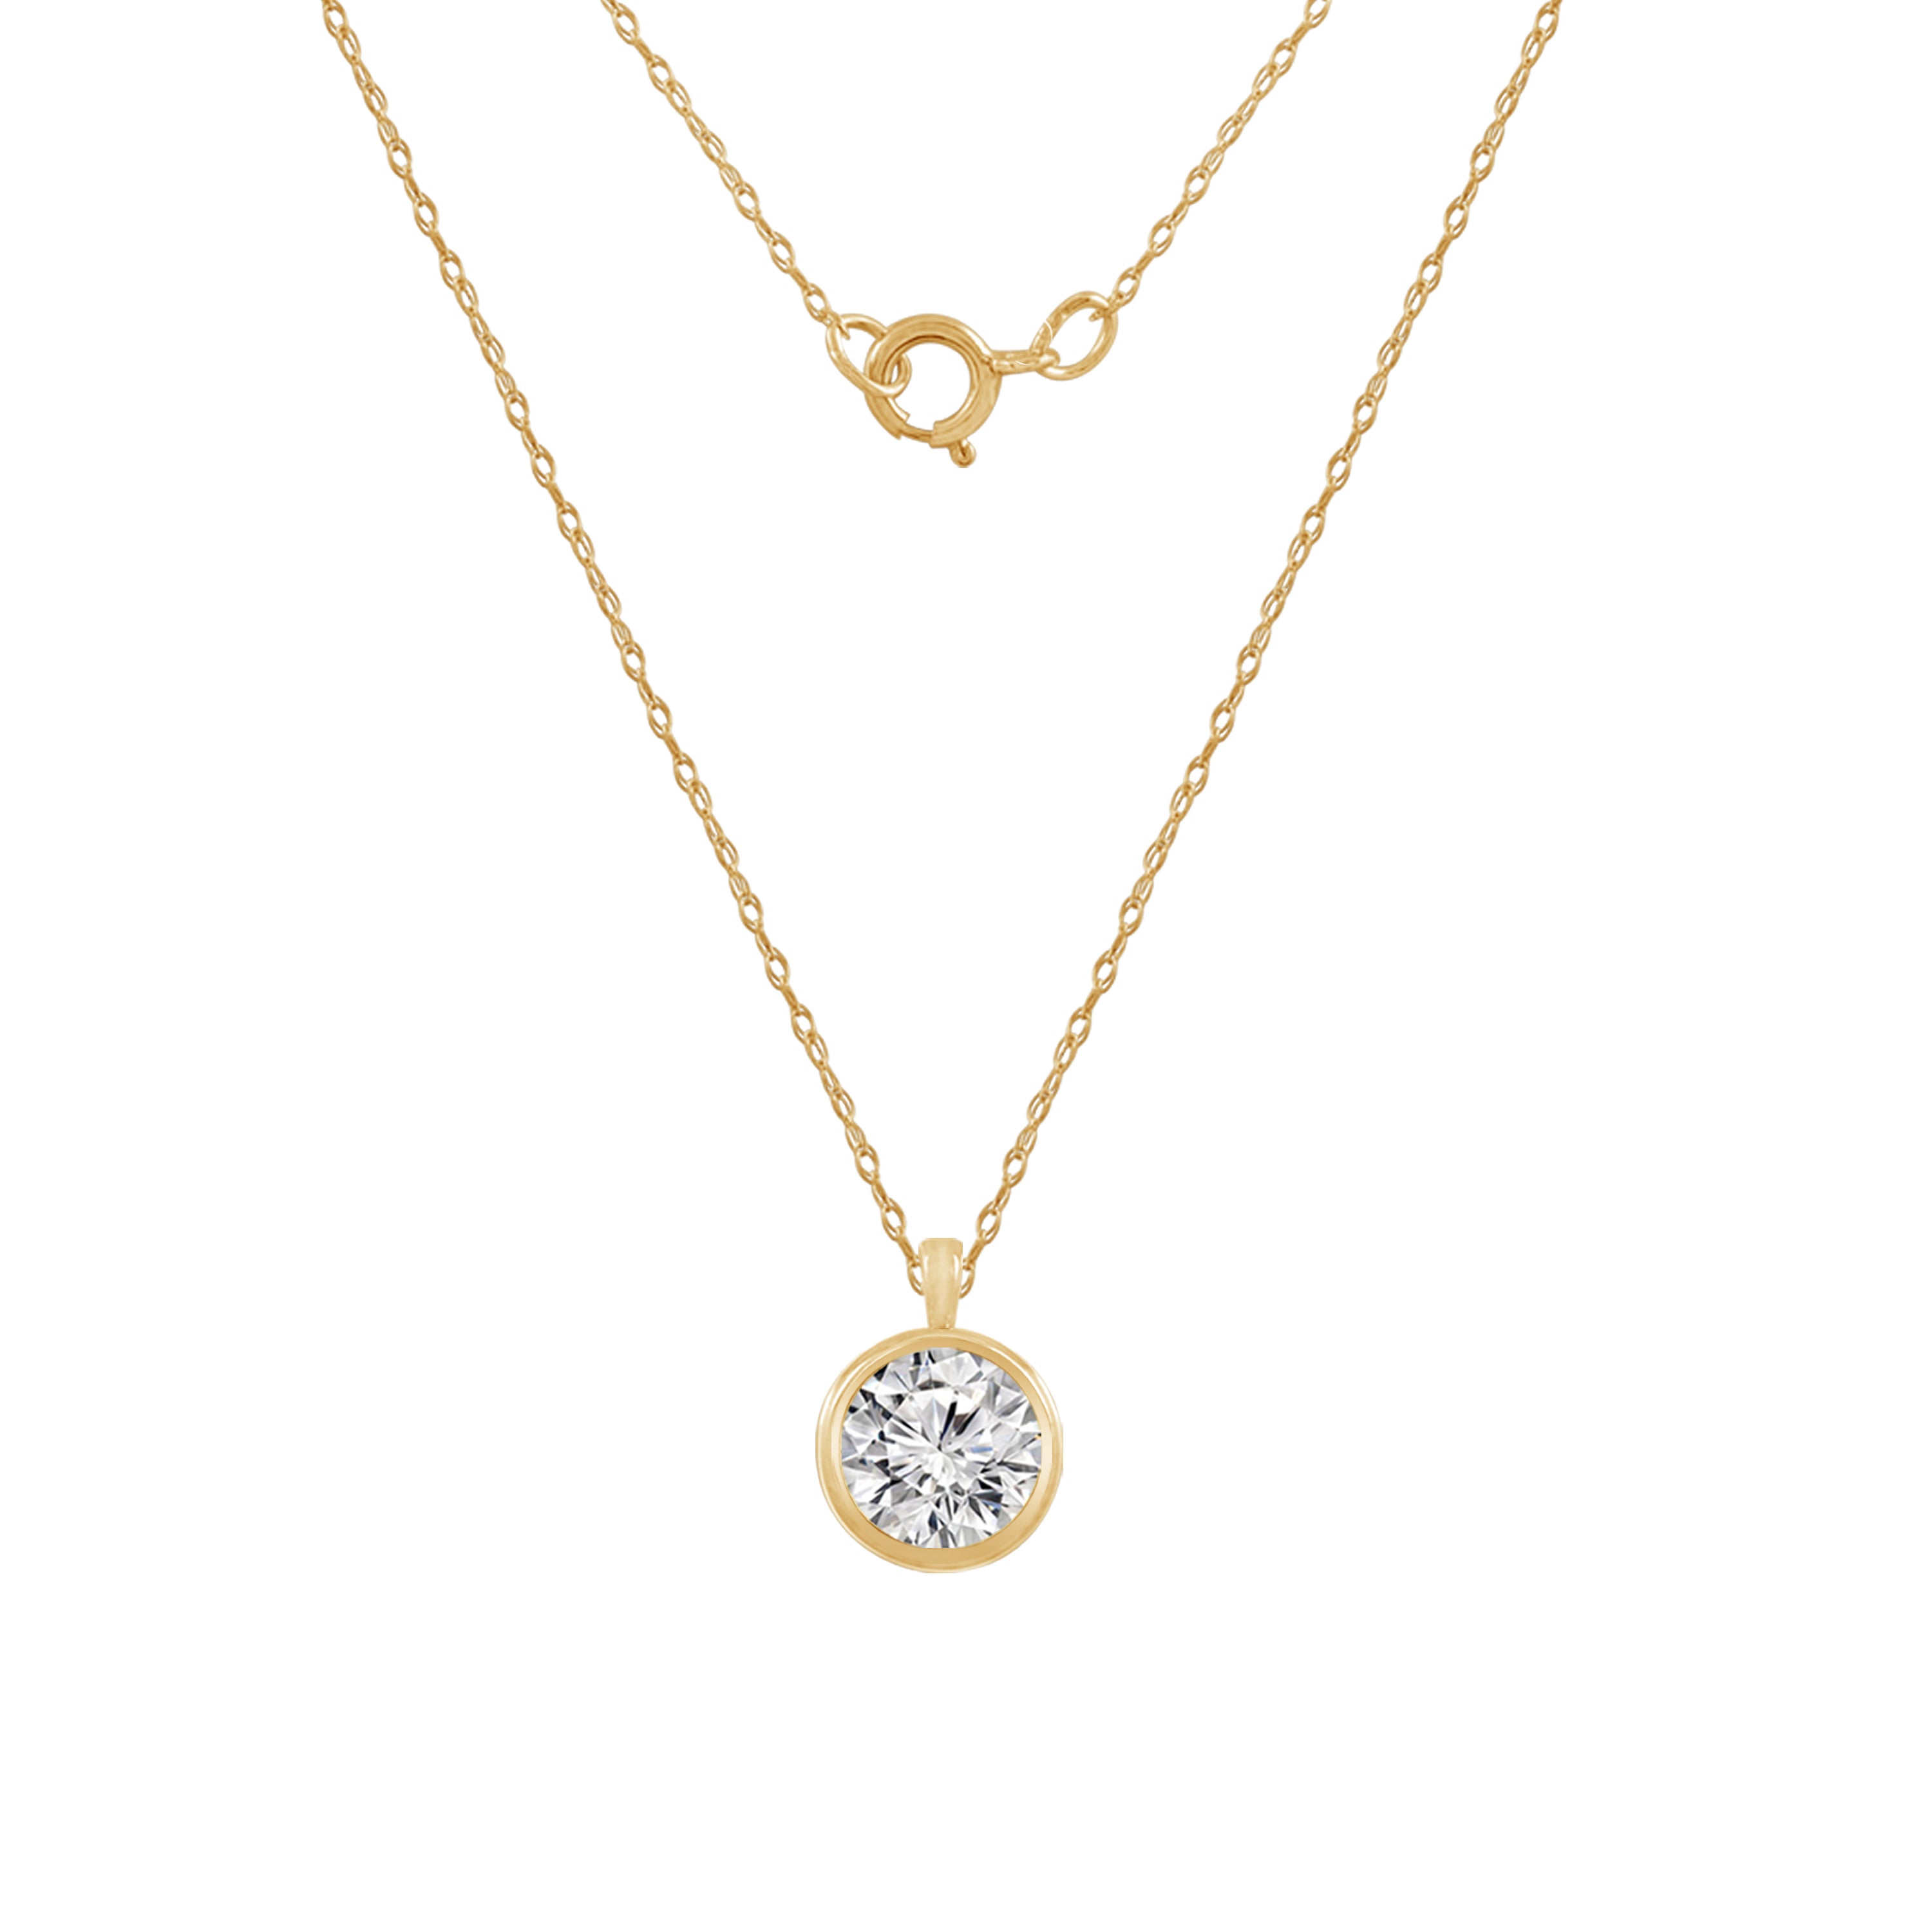 10K or 14K Gold Bezel Round Solitaire Necklace, 0.5 to 3 carat